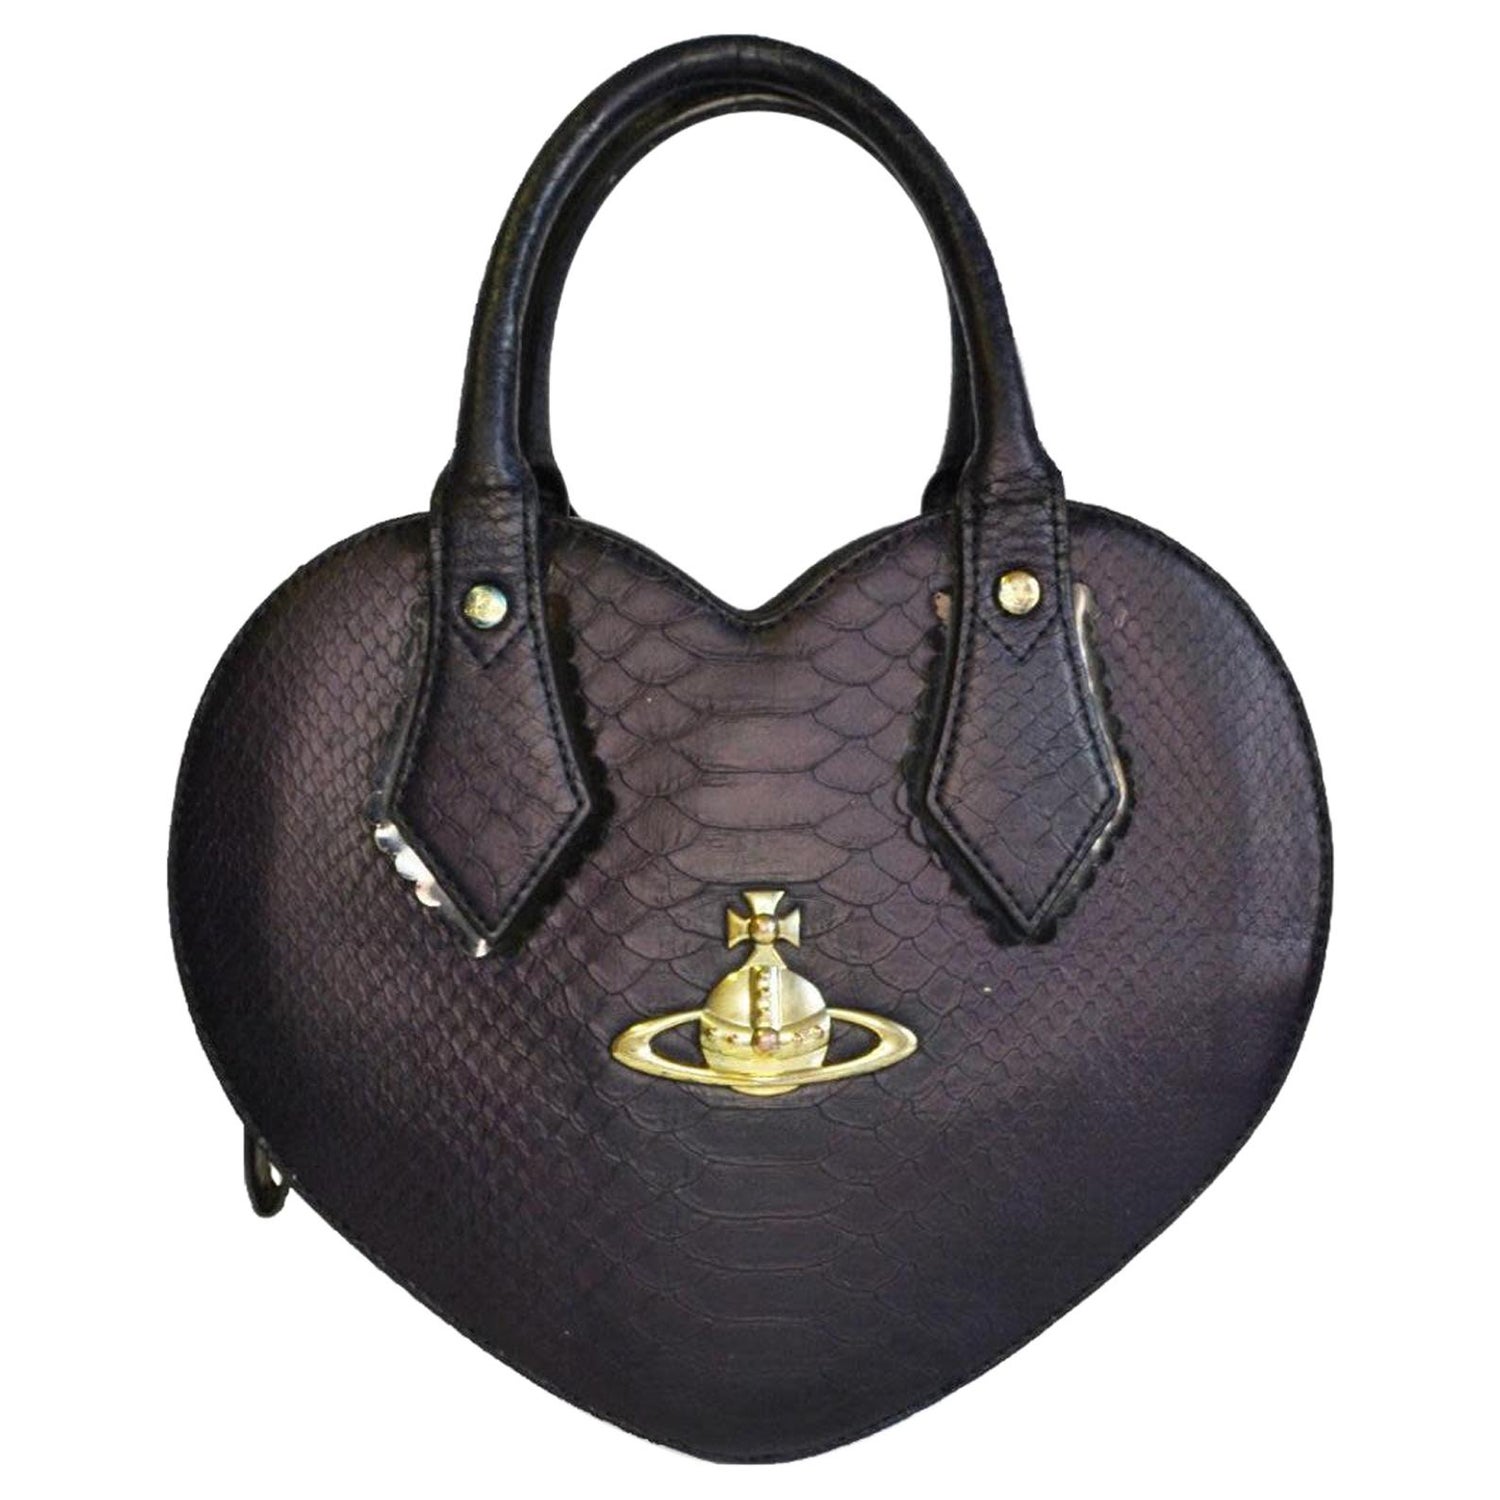 Vivienne Westwood Anglomania Women's Frilly Snake Heart Bag - Viola